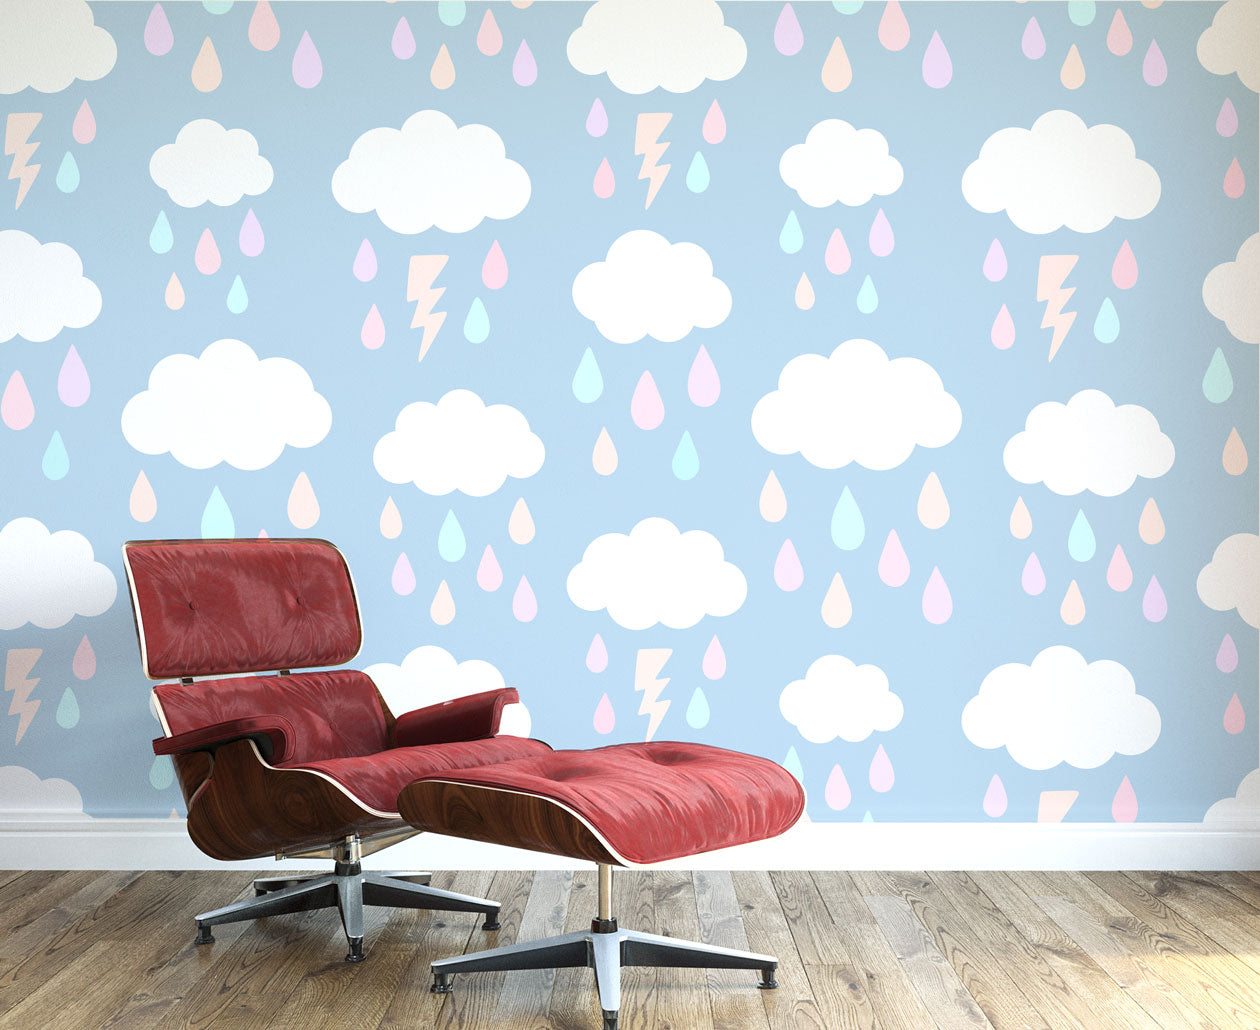 Rain And Clouds Wall Mural